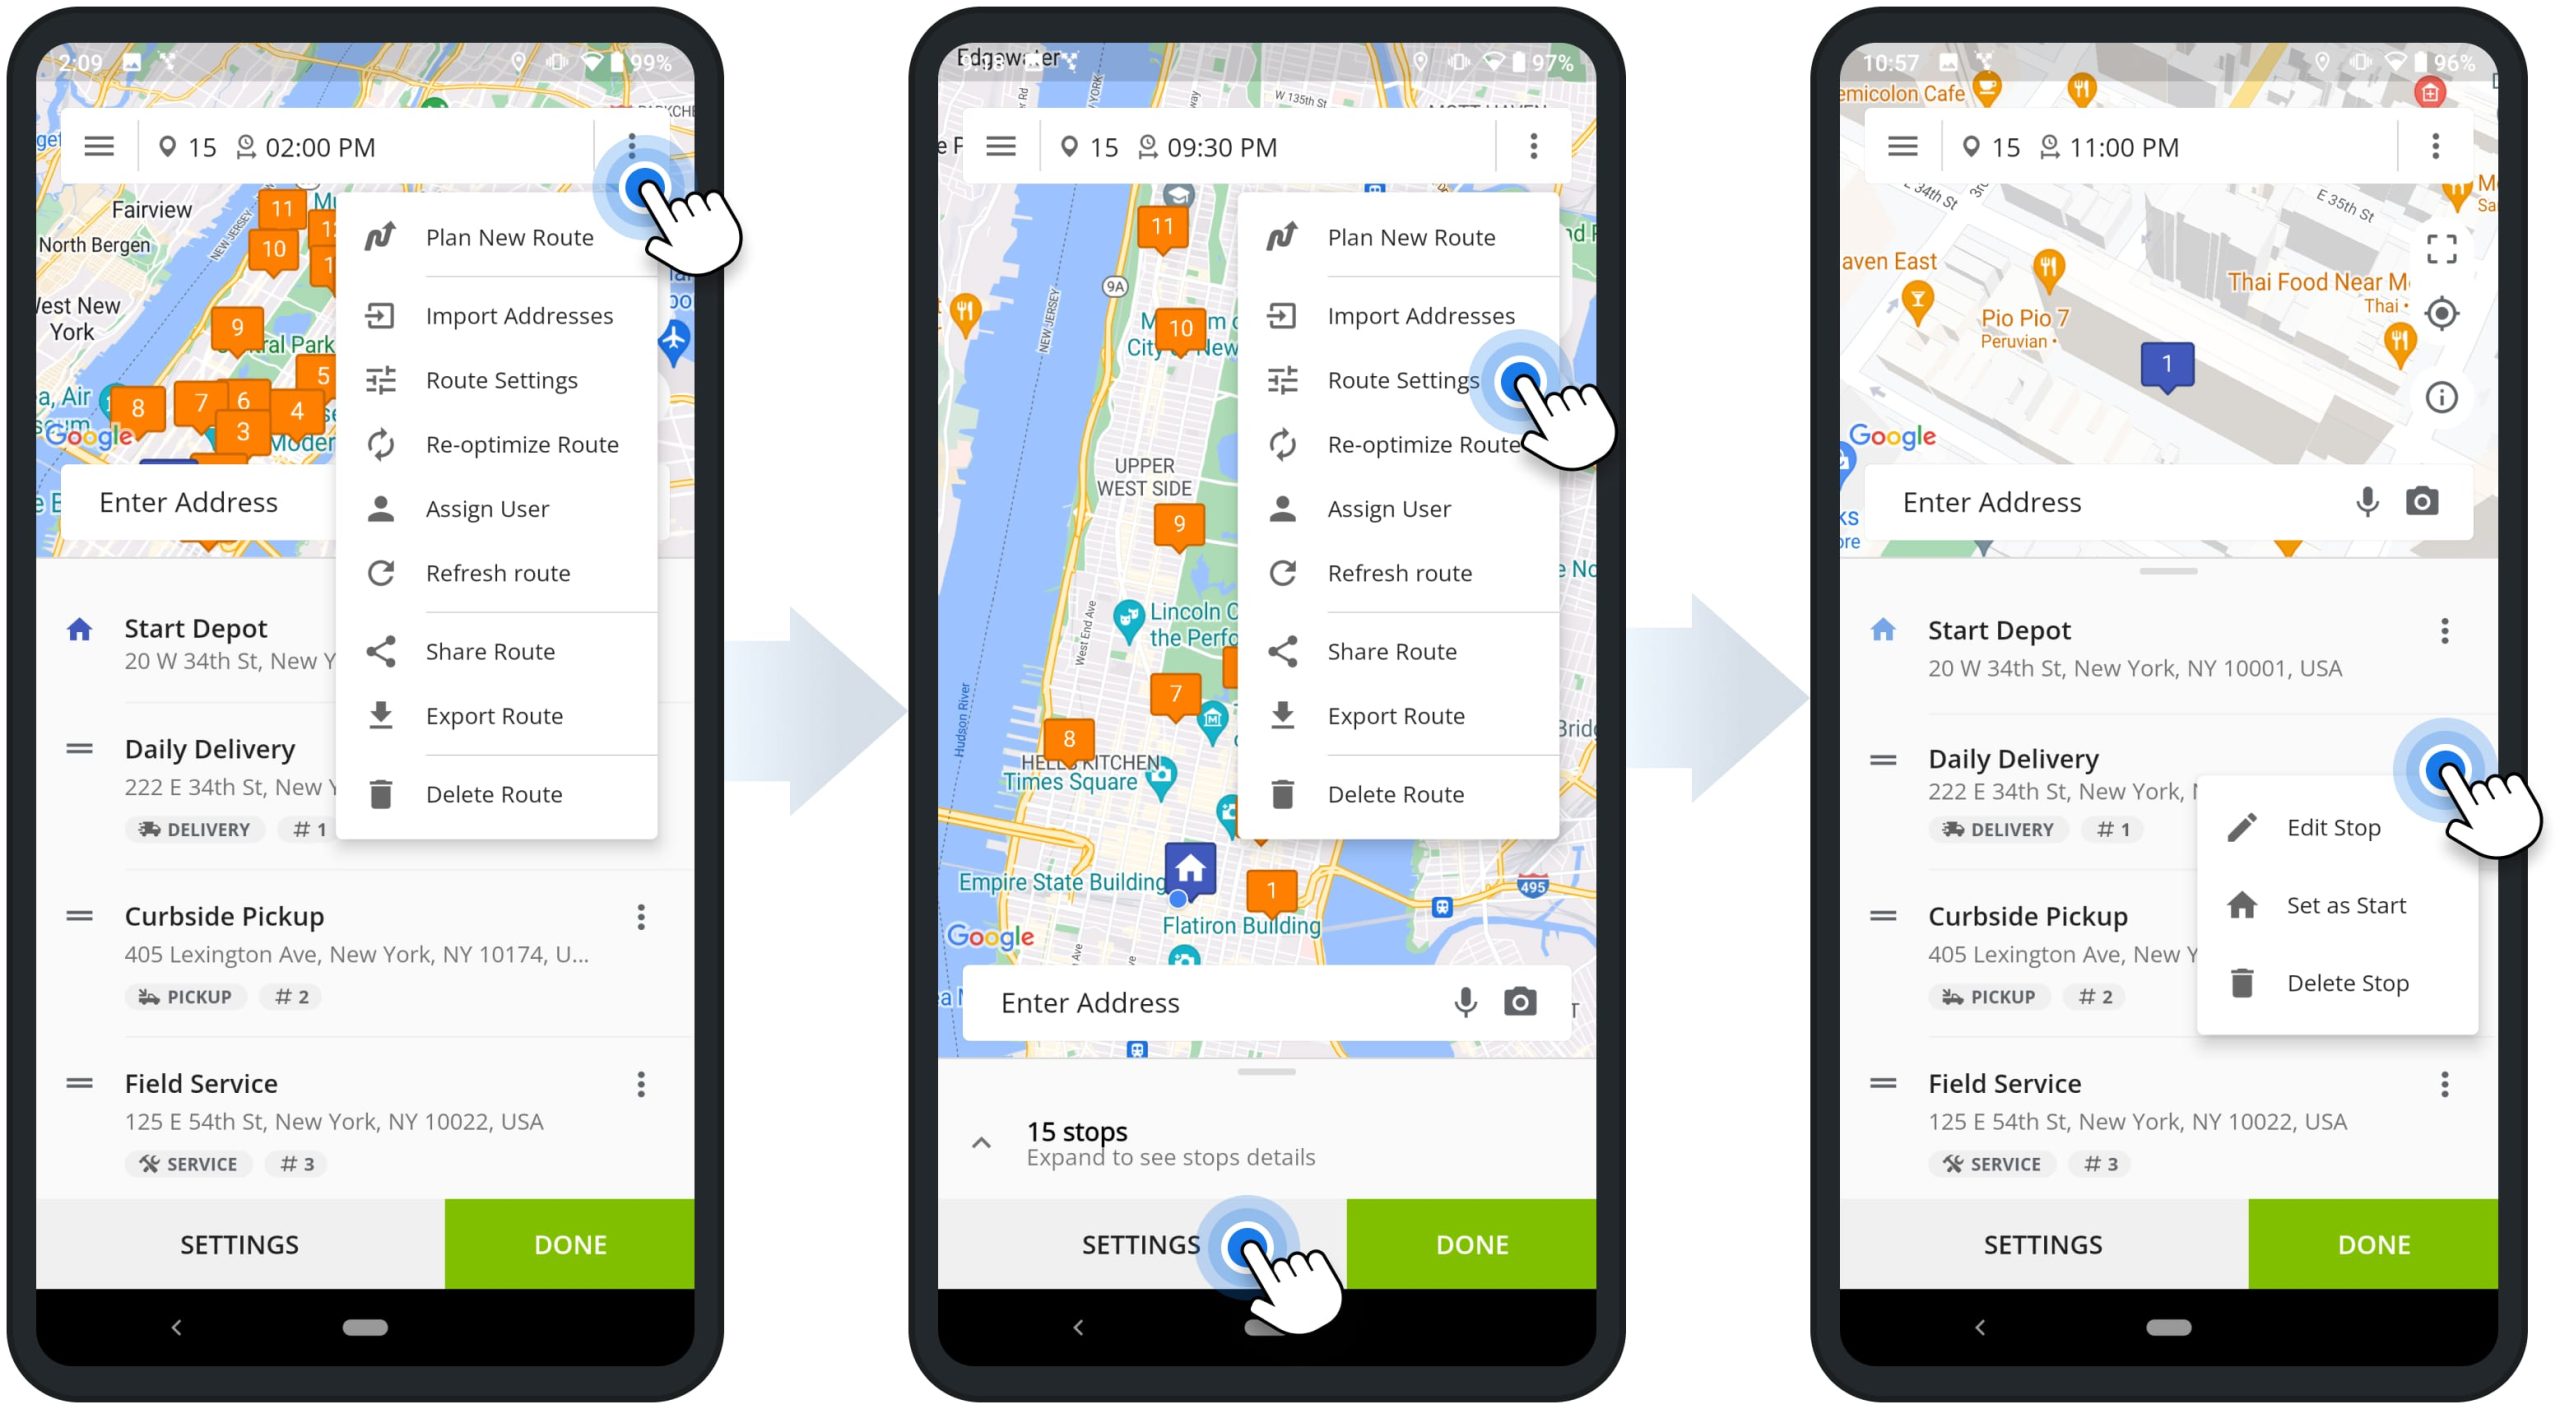 Access, open, and manage your and team's routes, edit stops, send routes to drivers, re-optimize routes, reschedule routes, etc., on Route4Me's Android Route Planning app.